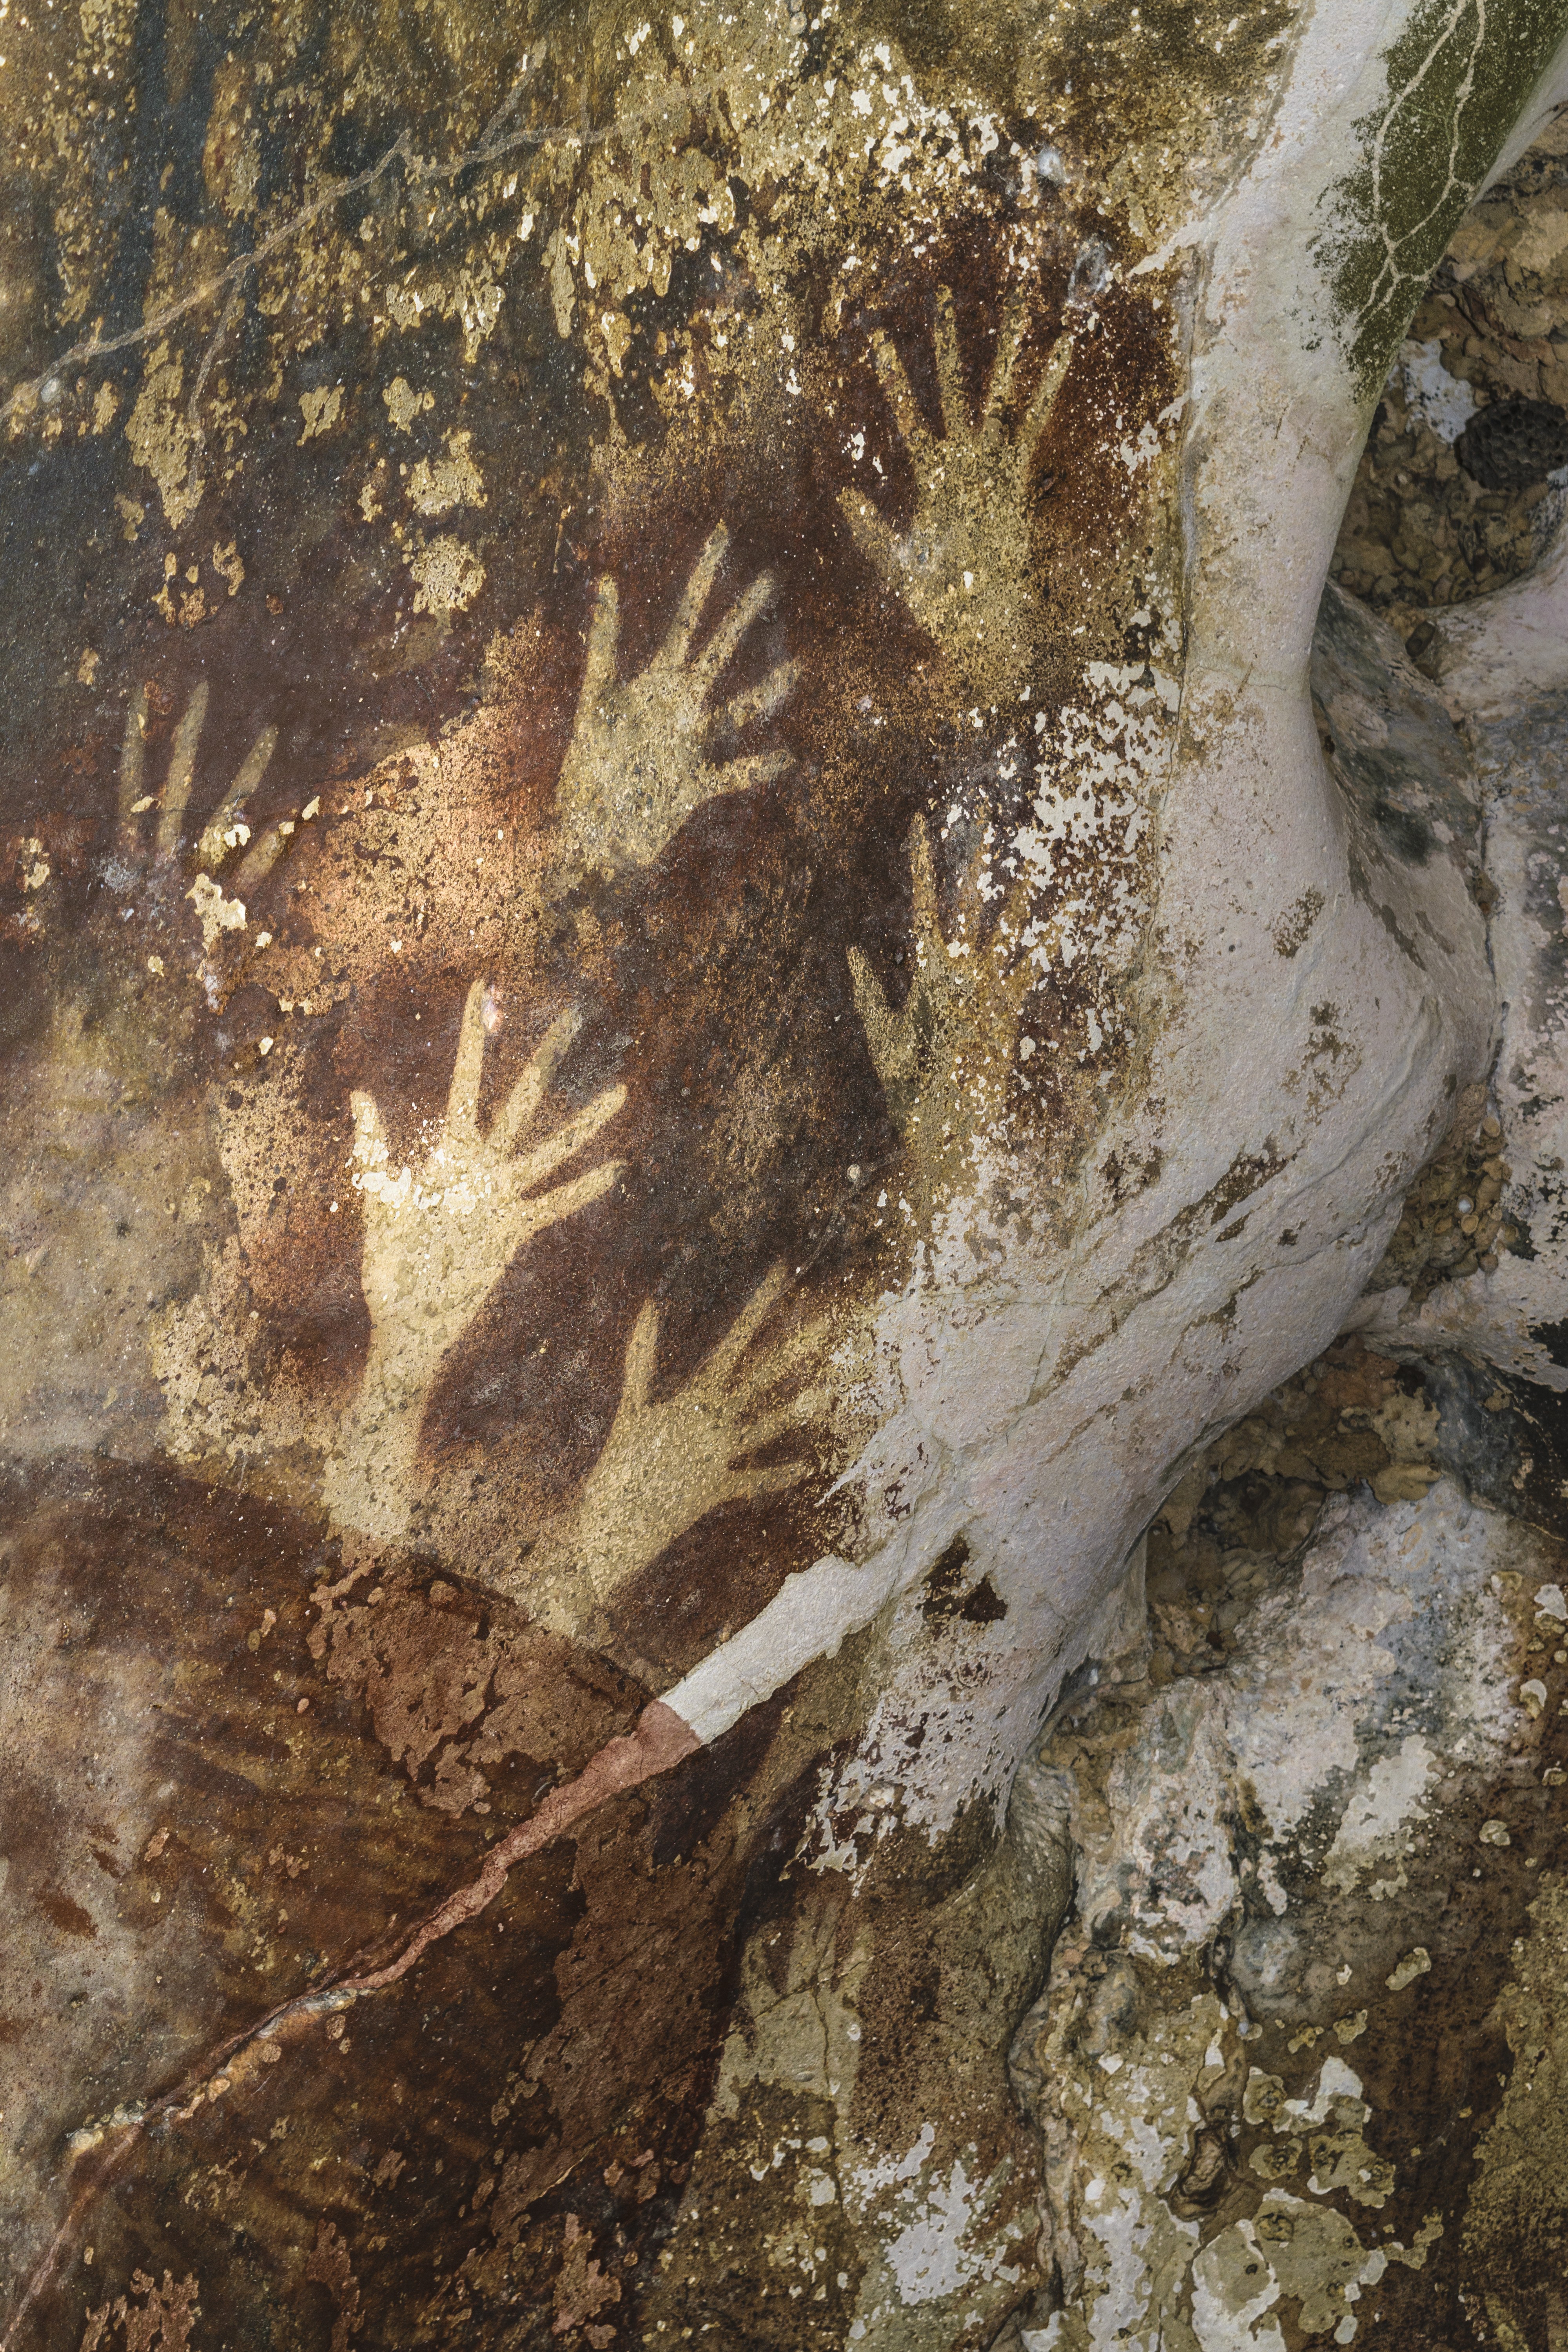 Prehistoric art in the caves of Maros, near Makassar, includes the world's earliest human hand stencils.